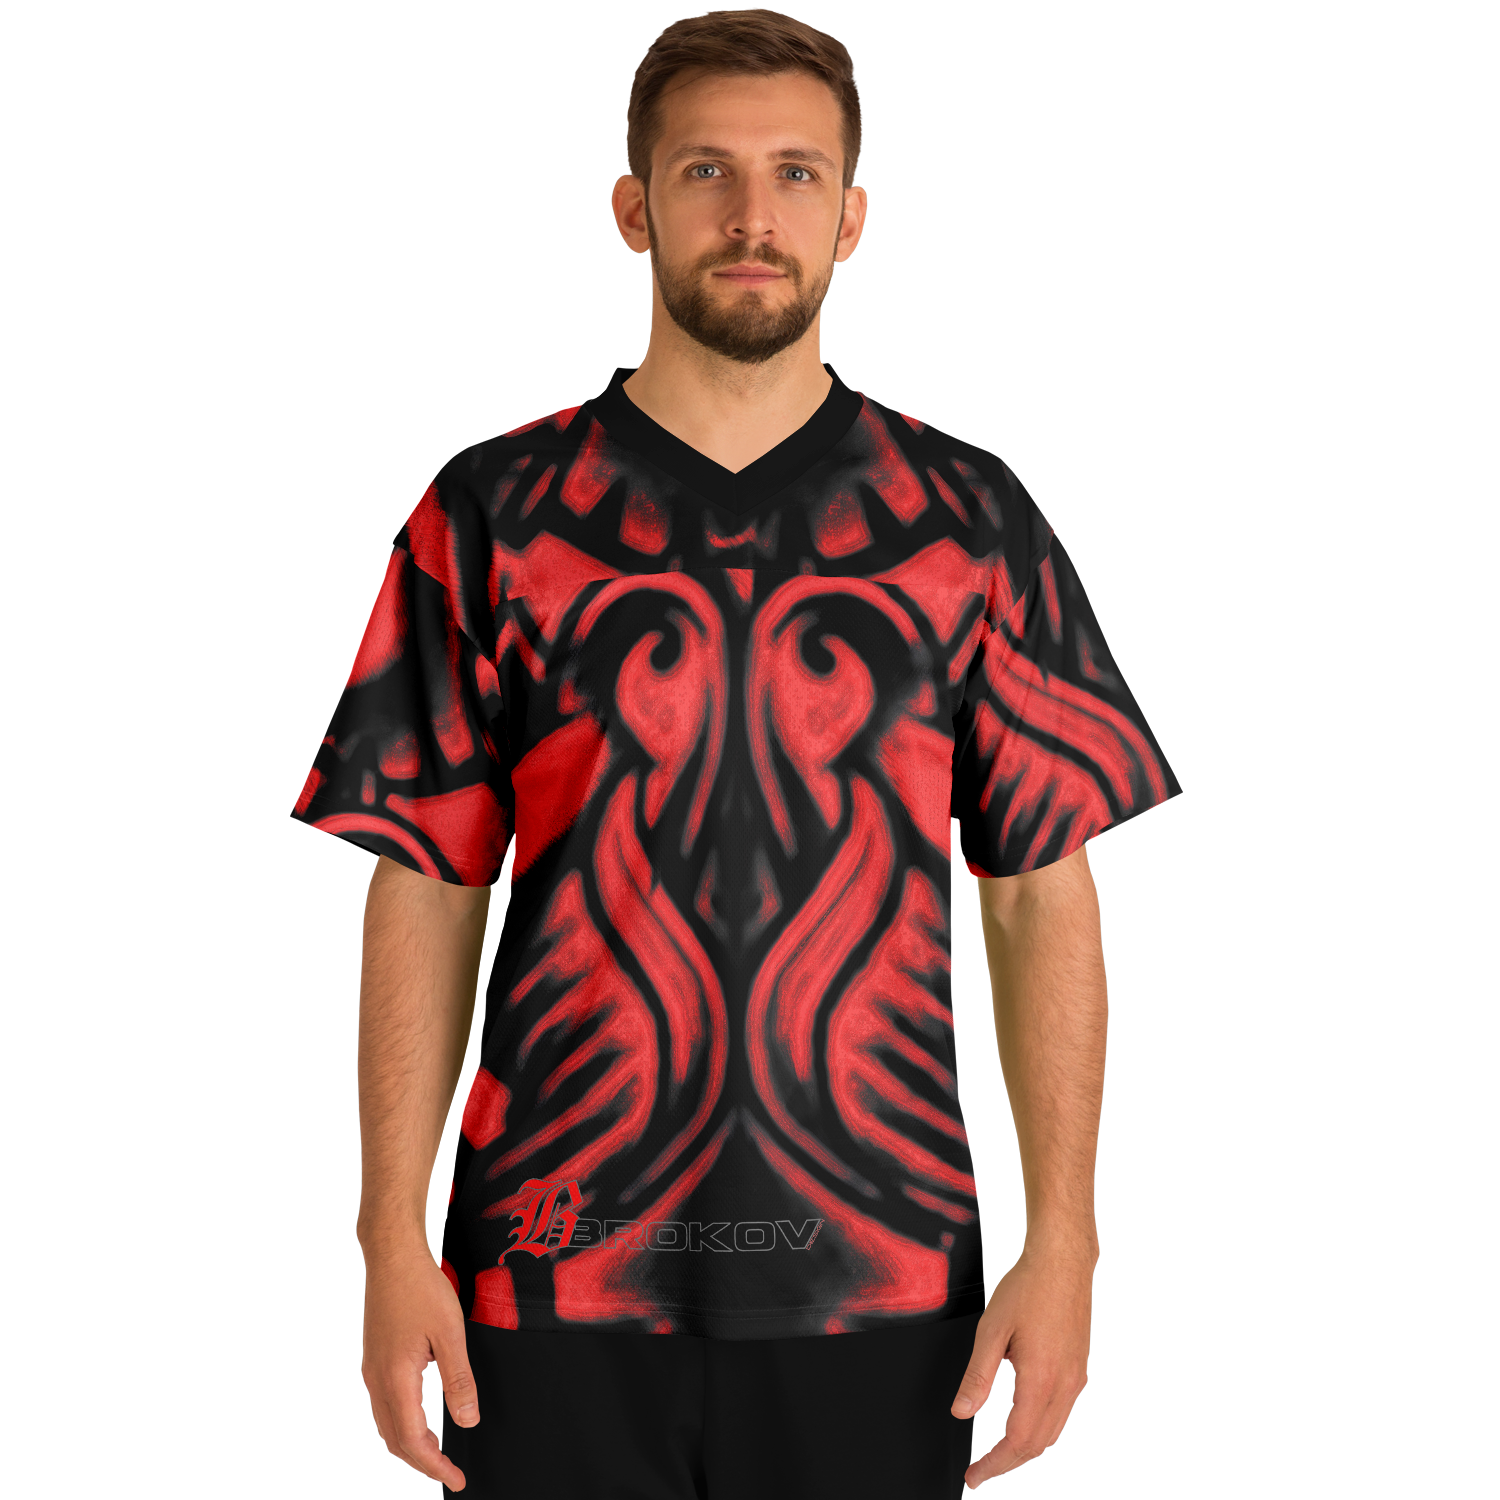 THE UNKNOWN FOOTBALL JERSEY